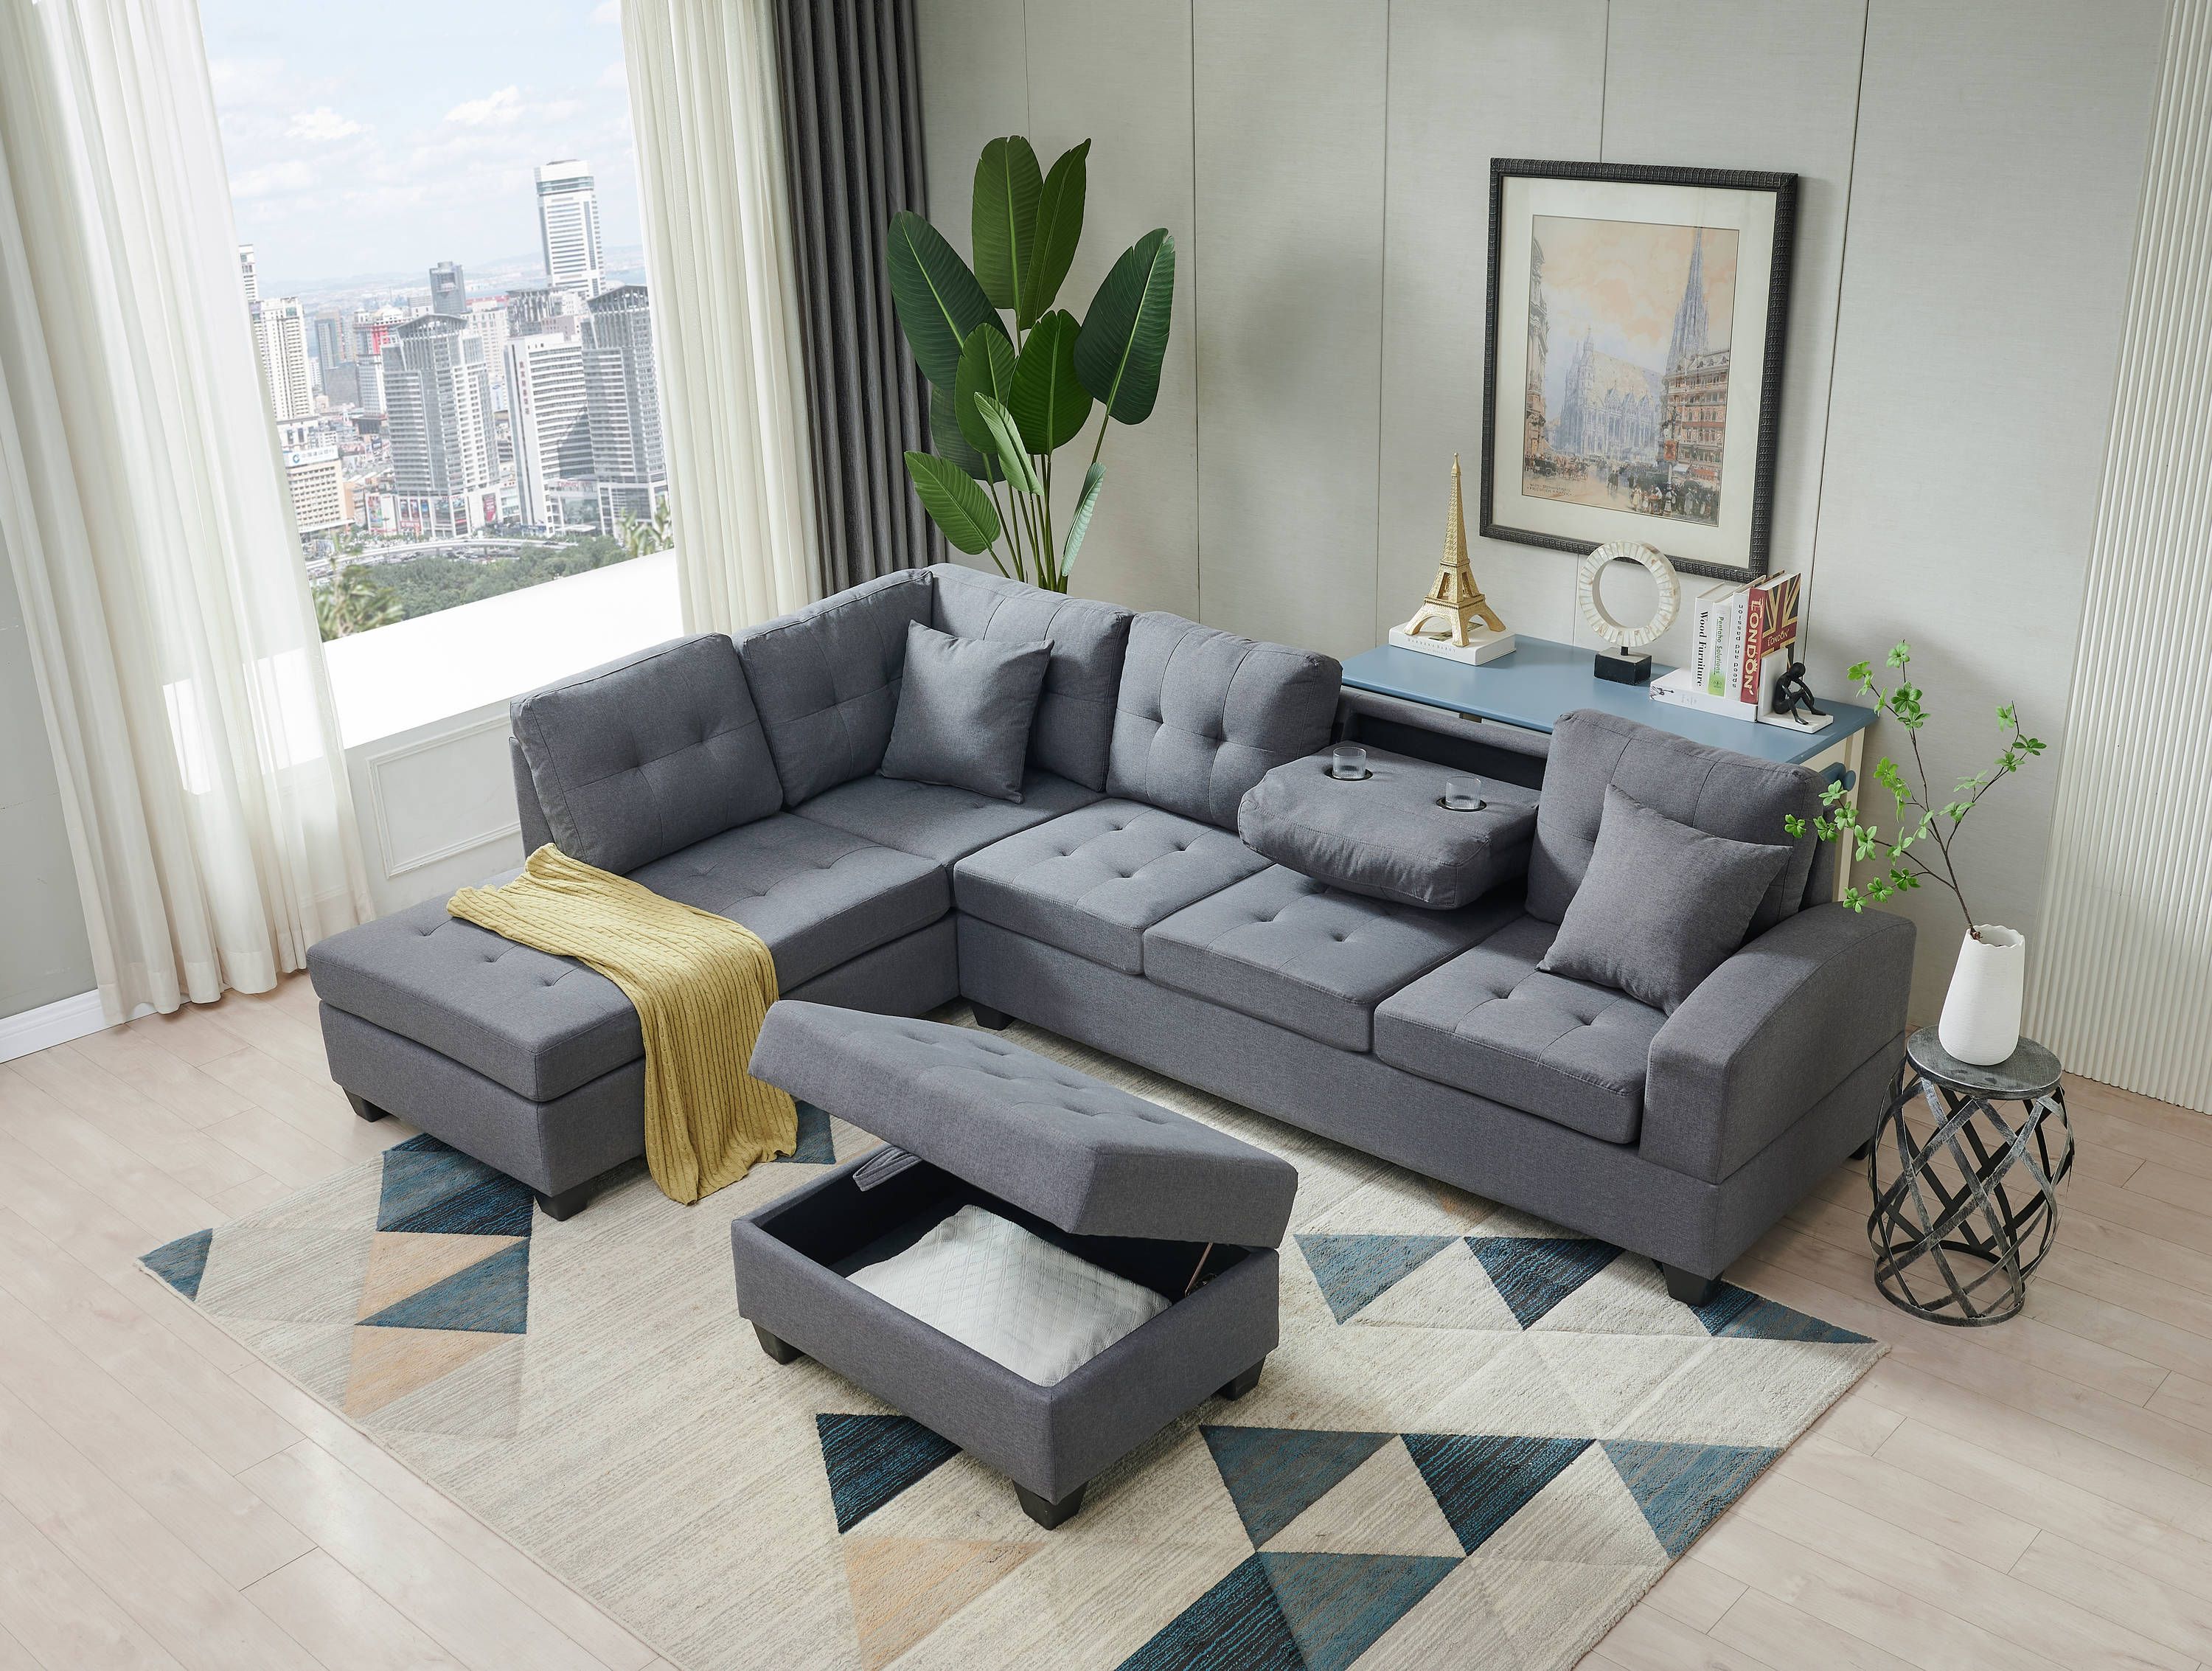 Clihome Sectional 3 Seaters Sofa With Reversible Chaise Modern Gray  Polyester/blend Sectional In The Couches, Sofas & Loveseats Department At  Lowes Intended For 3 Seat Sofa Sectionals With Reversible Chaise (View 7 of 20)